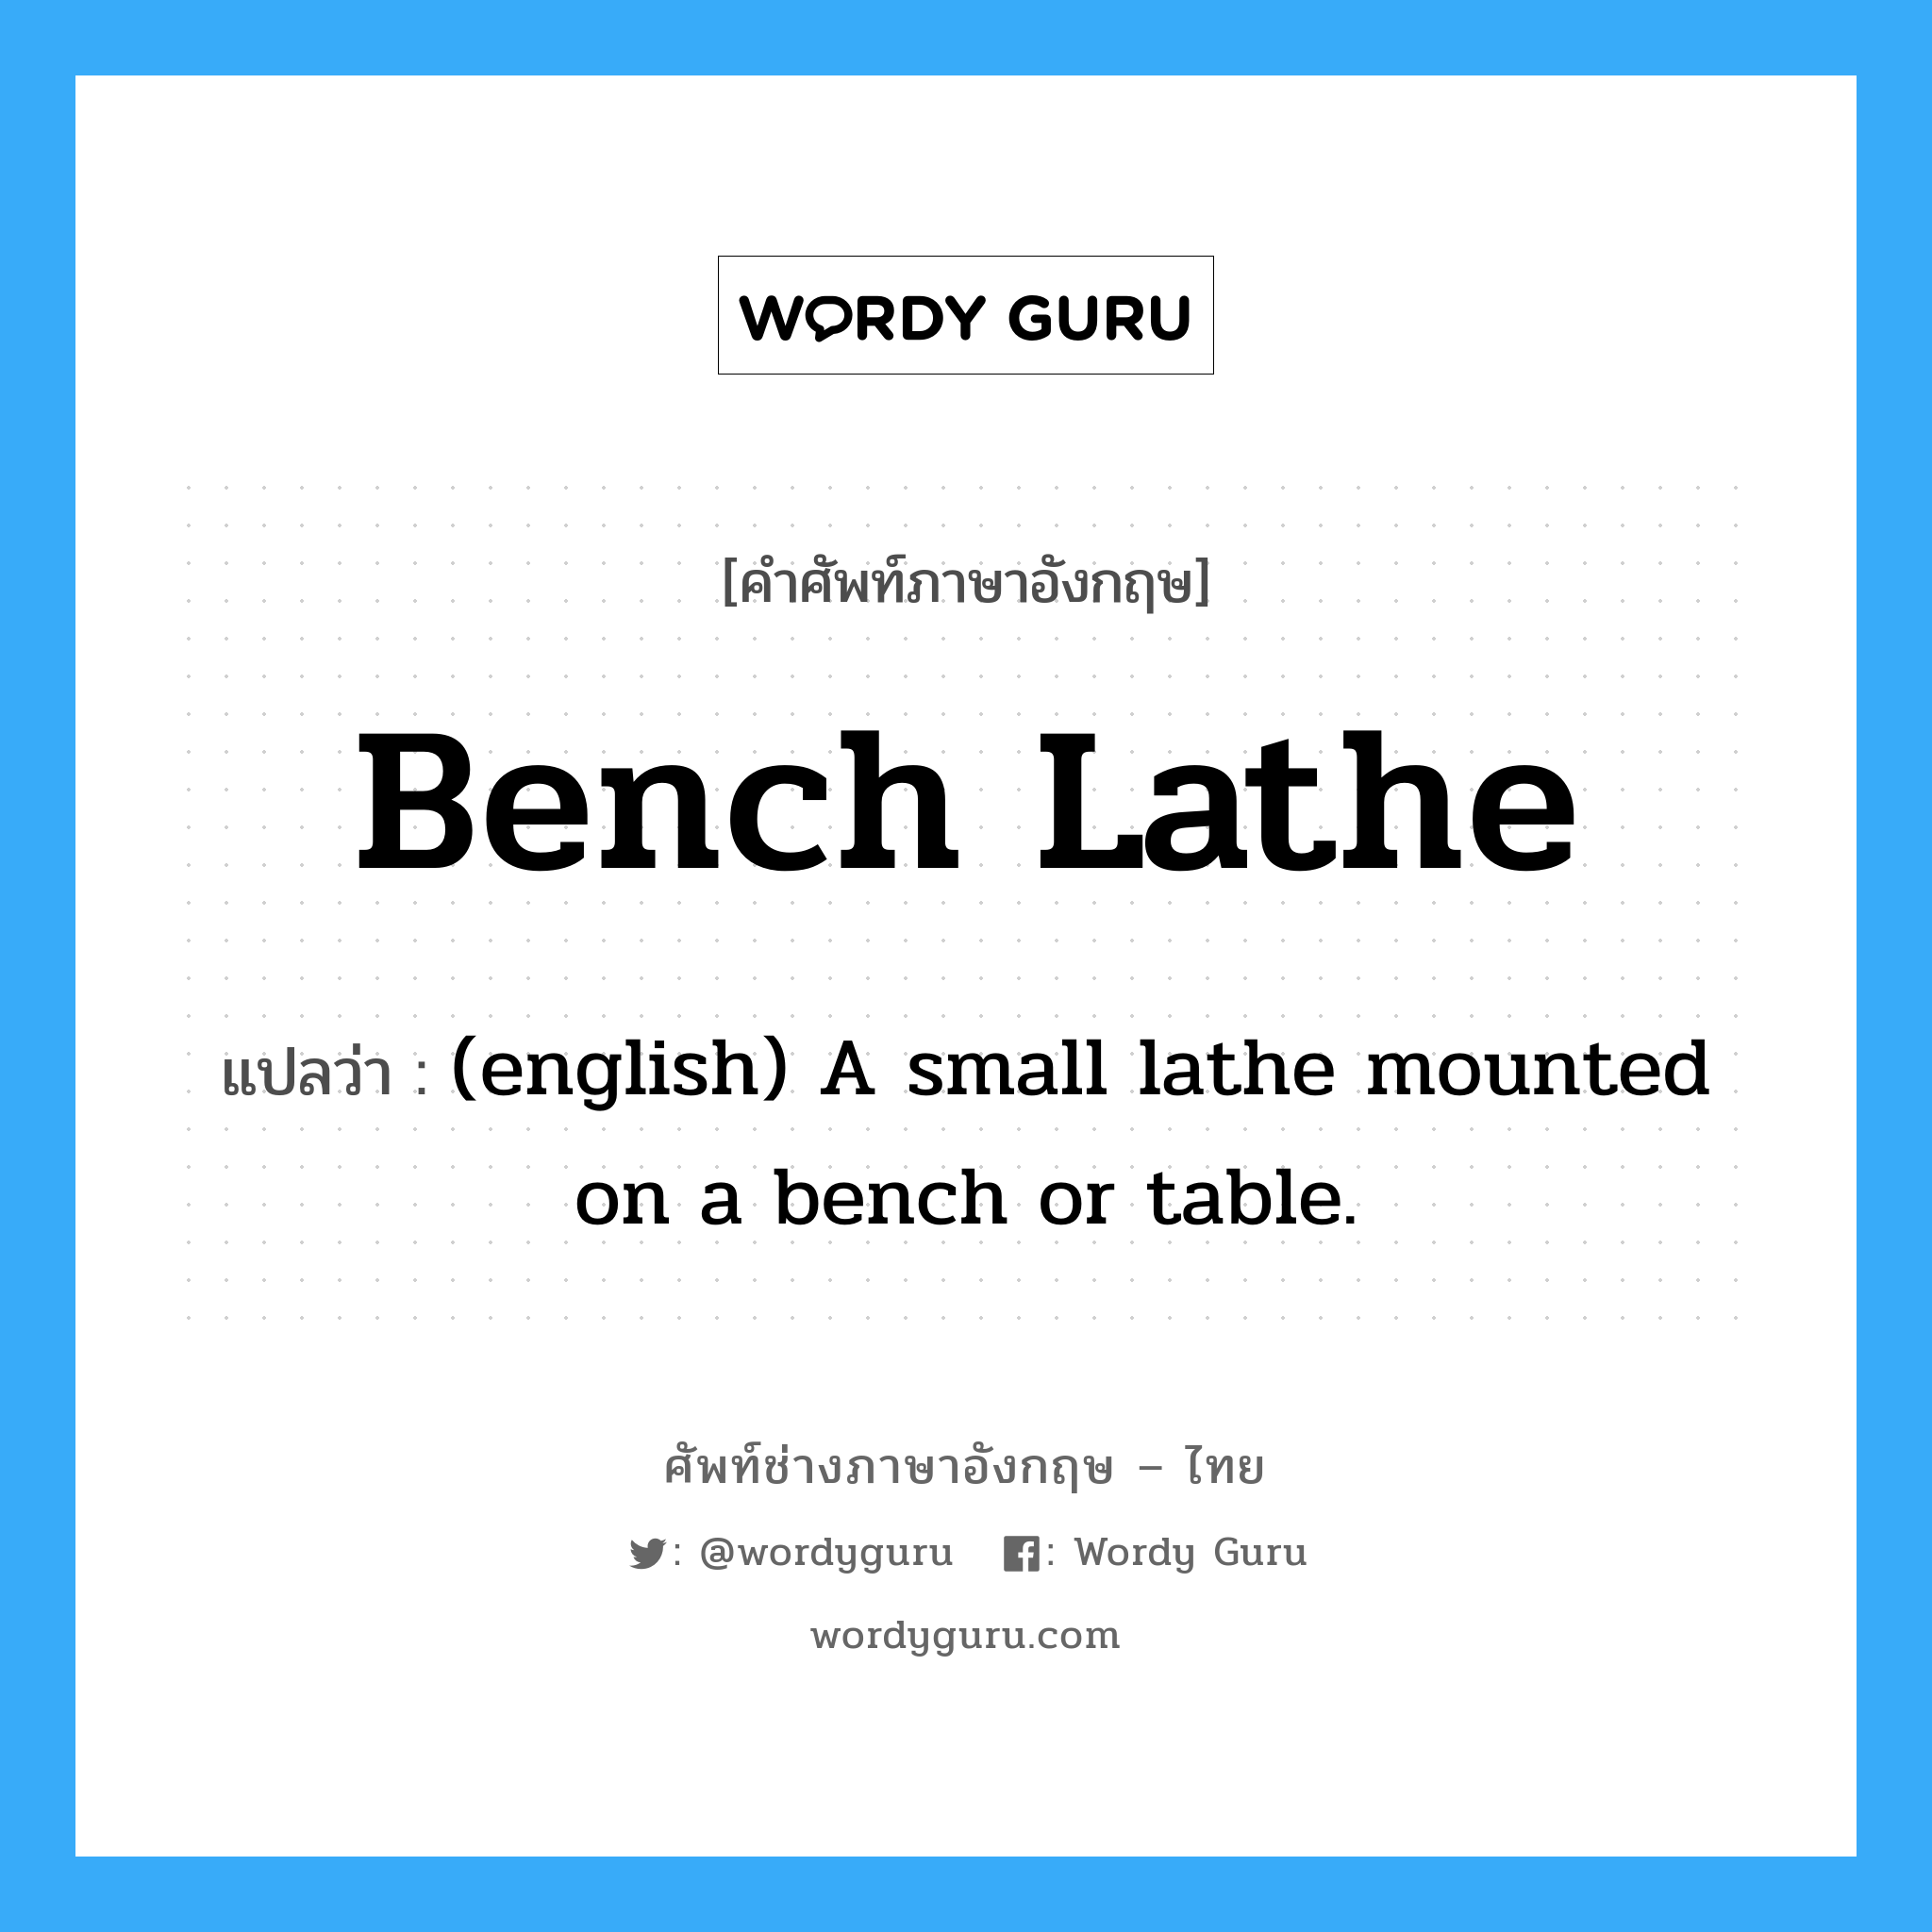 Bench Lathe แปลว่า?, คำศัพท์ช่างภาษาอังกฤษ - ไทย Bench Lathe คำศัพท์ภาษาอังกฤษ Bench Lathe แปลว่า (english) A small lathe mounted on a bench or table.